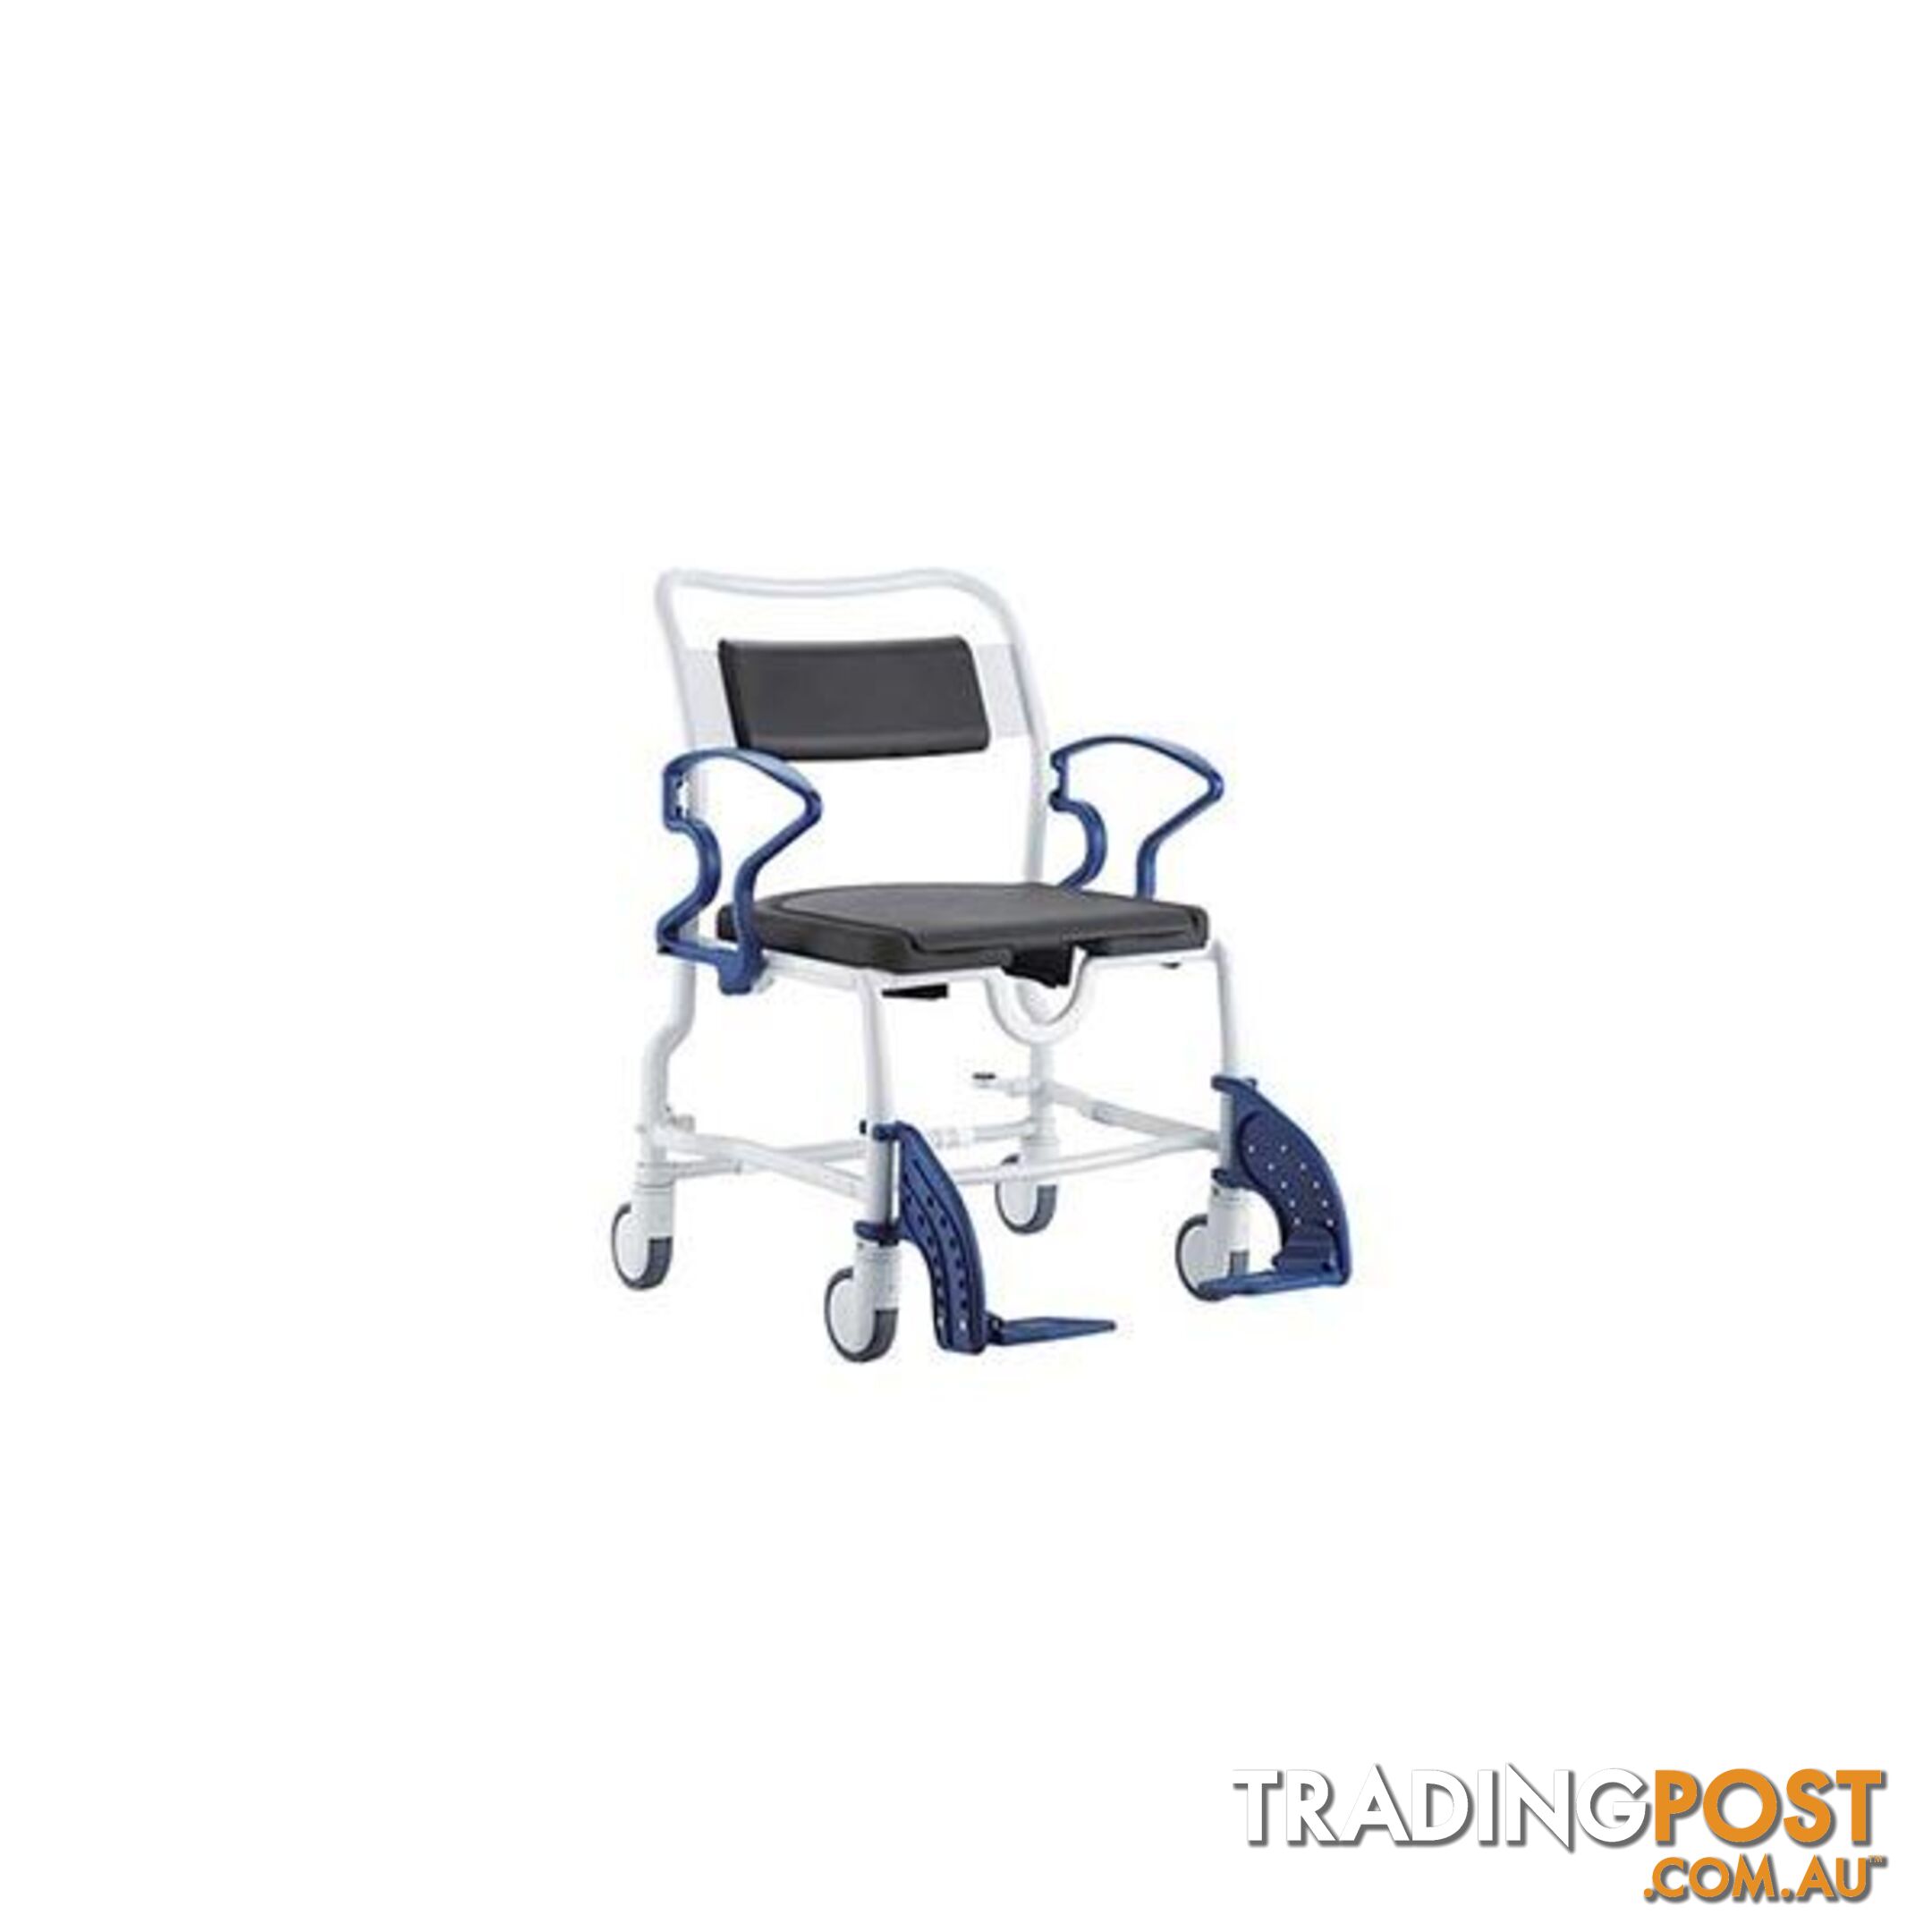 Wide Bariatric Shower Commode Chair - Shower Commode Chair - 7427046218900